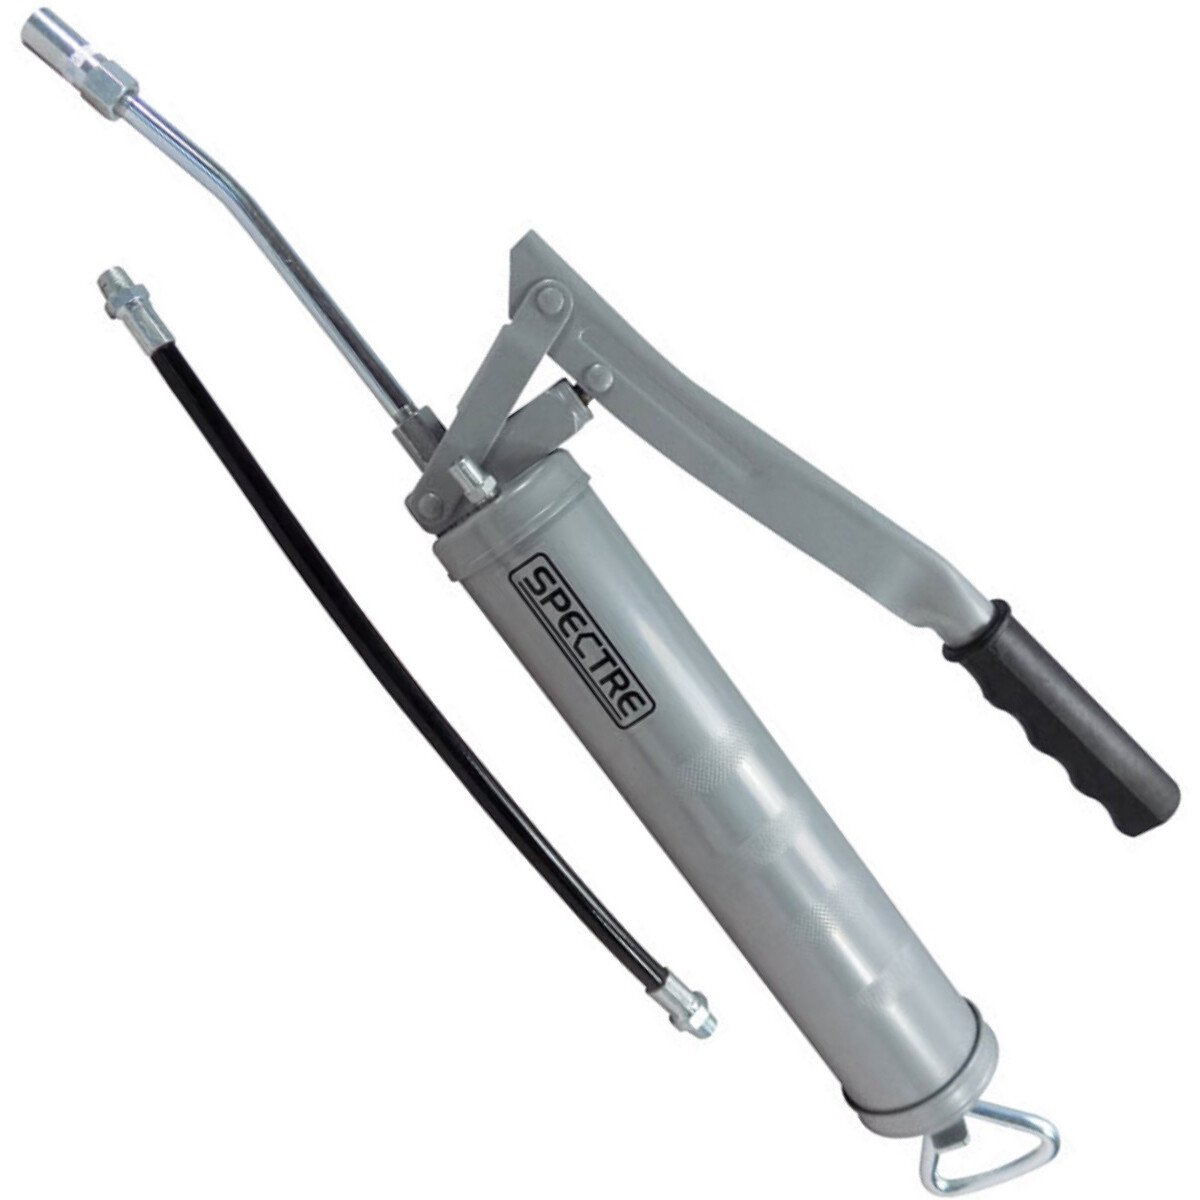 Spectre SP-17008 500cc Grease Gun with 2 Nozzles for Bulk or Cartridge Loading